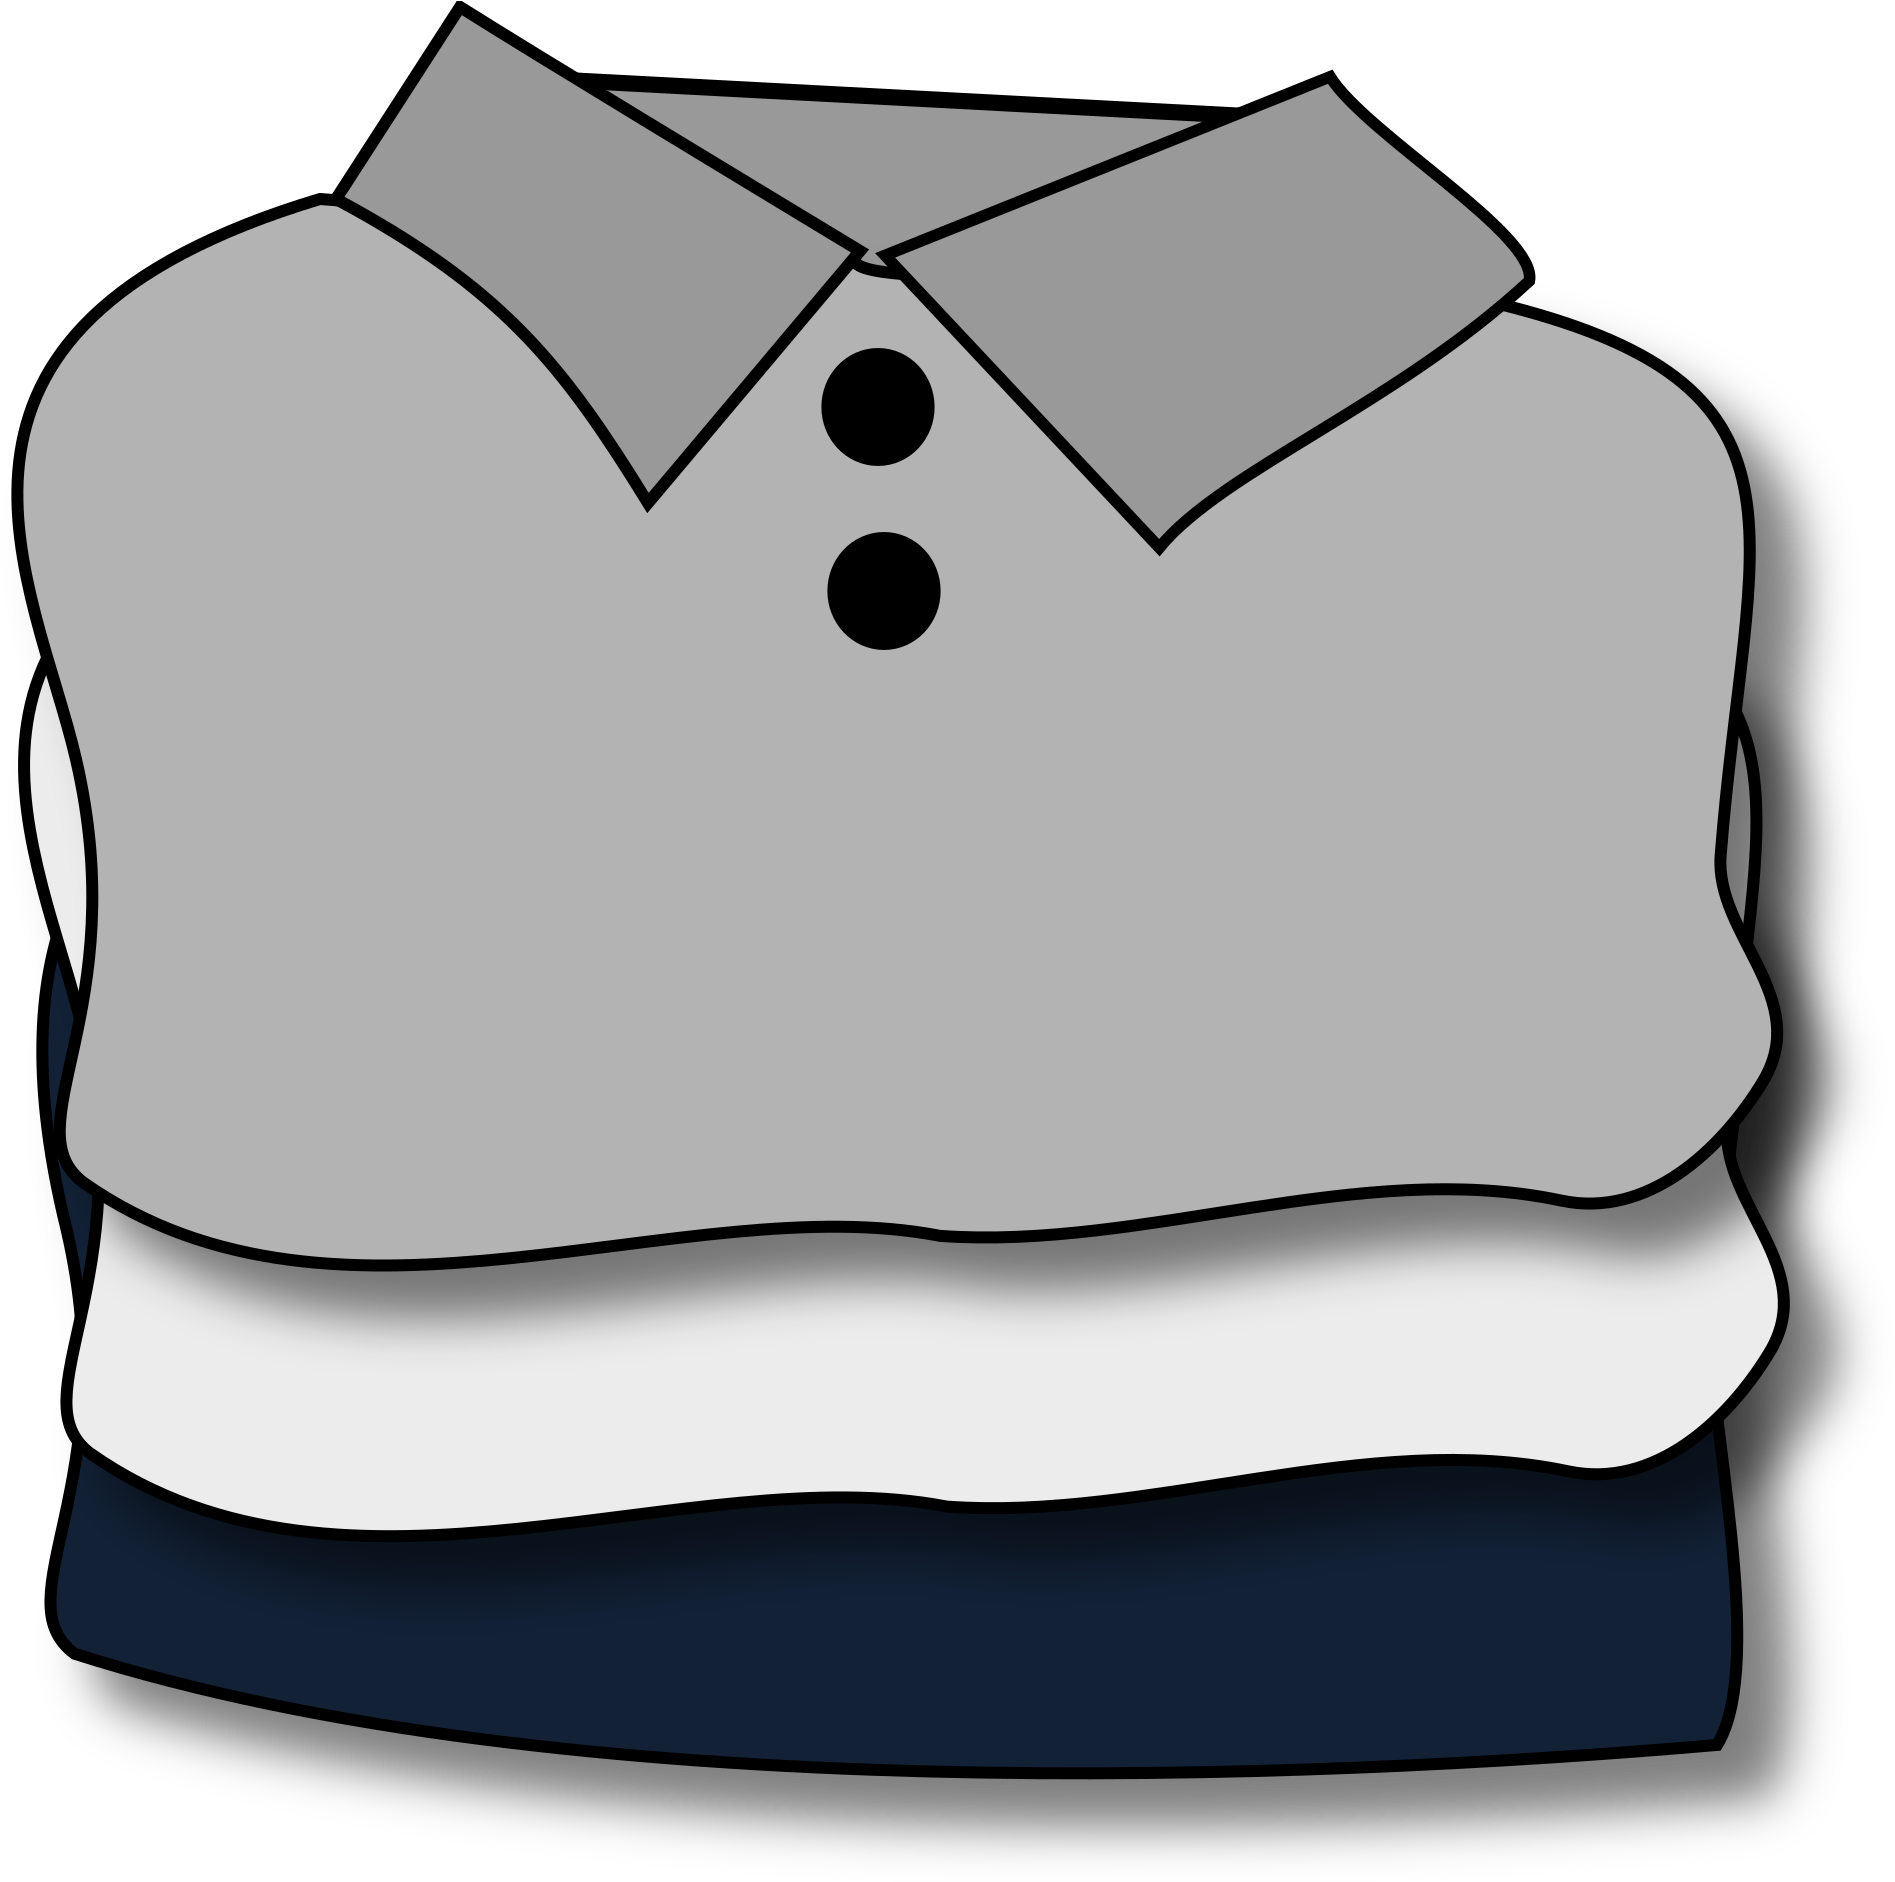 Other Popular Clip Arts - Folded Clothes Clipart.